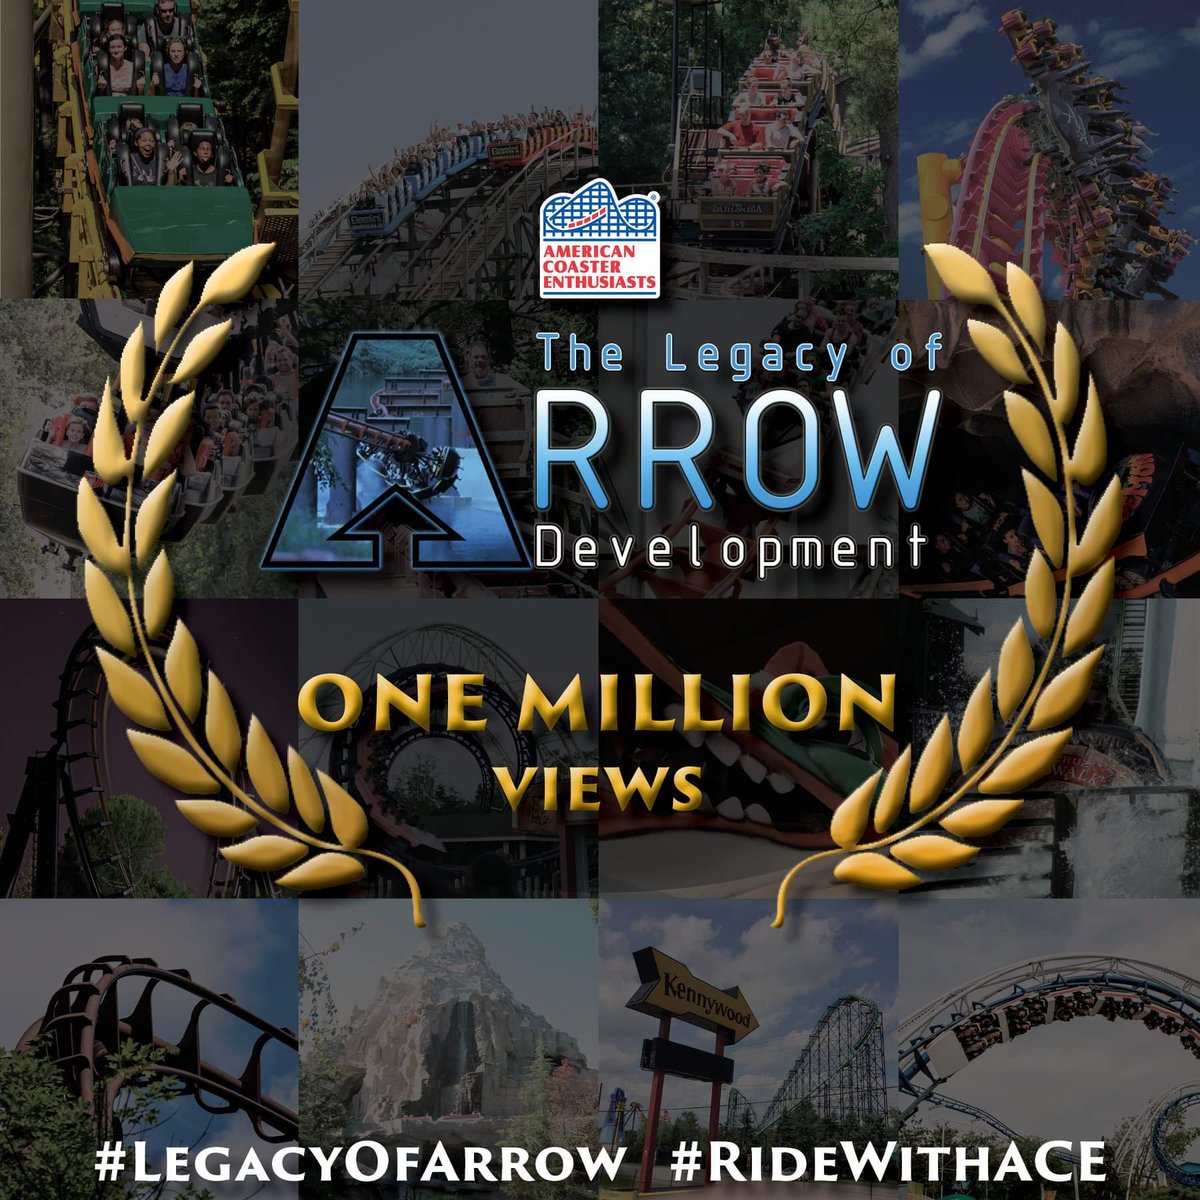 One year ago today, #LegacyOfArrow surpassed 1 million views on @YouTube. Since then, the film has racked up over 378k more. Talk about spreading the love. #RideWithACE